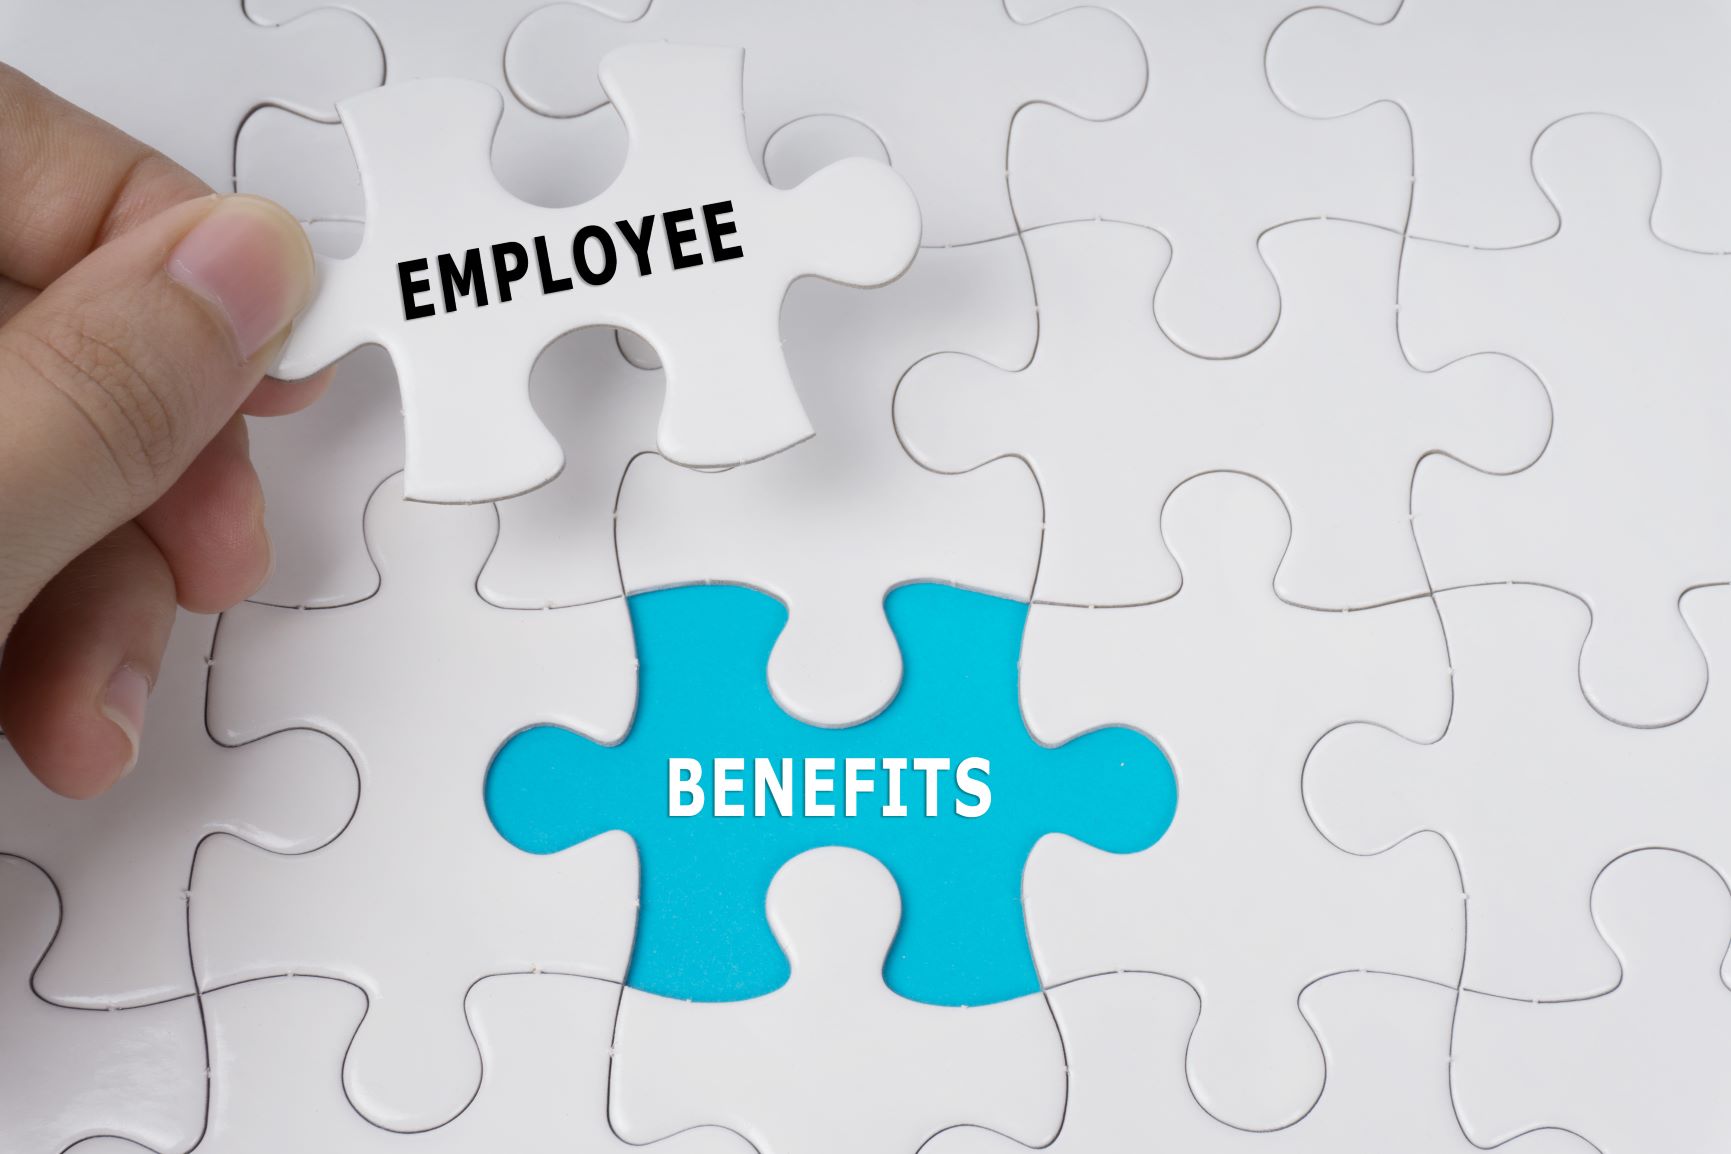 ‘Salary' or employee 'benefit' - Which is the judicious investment for business?